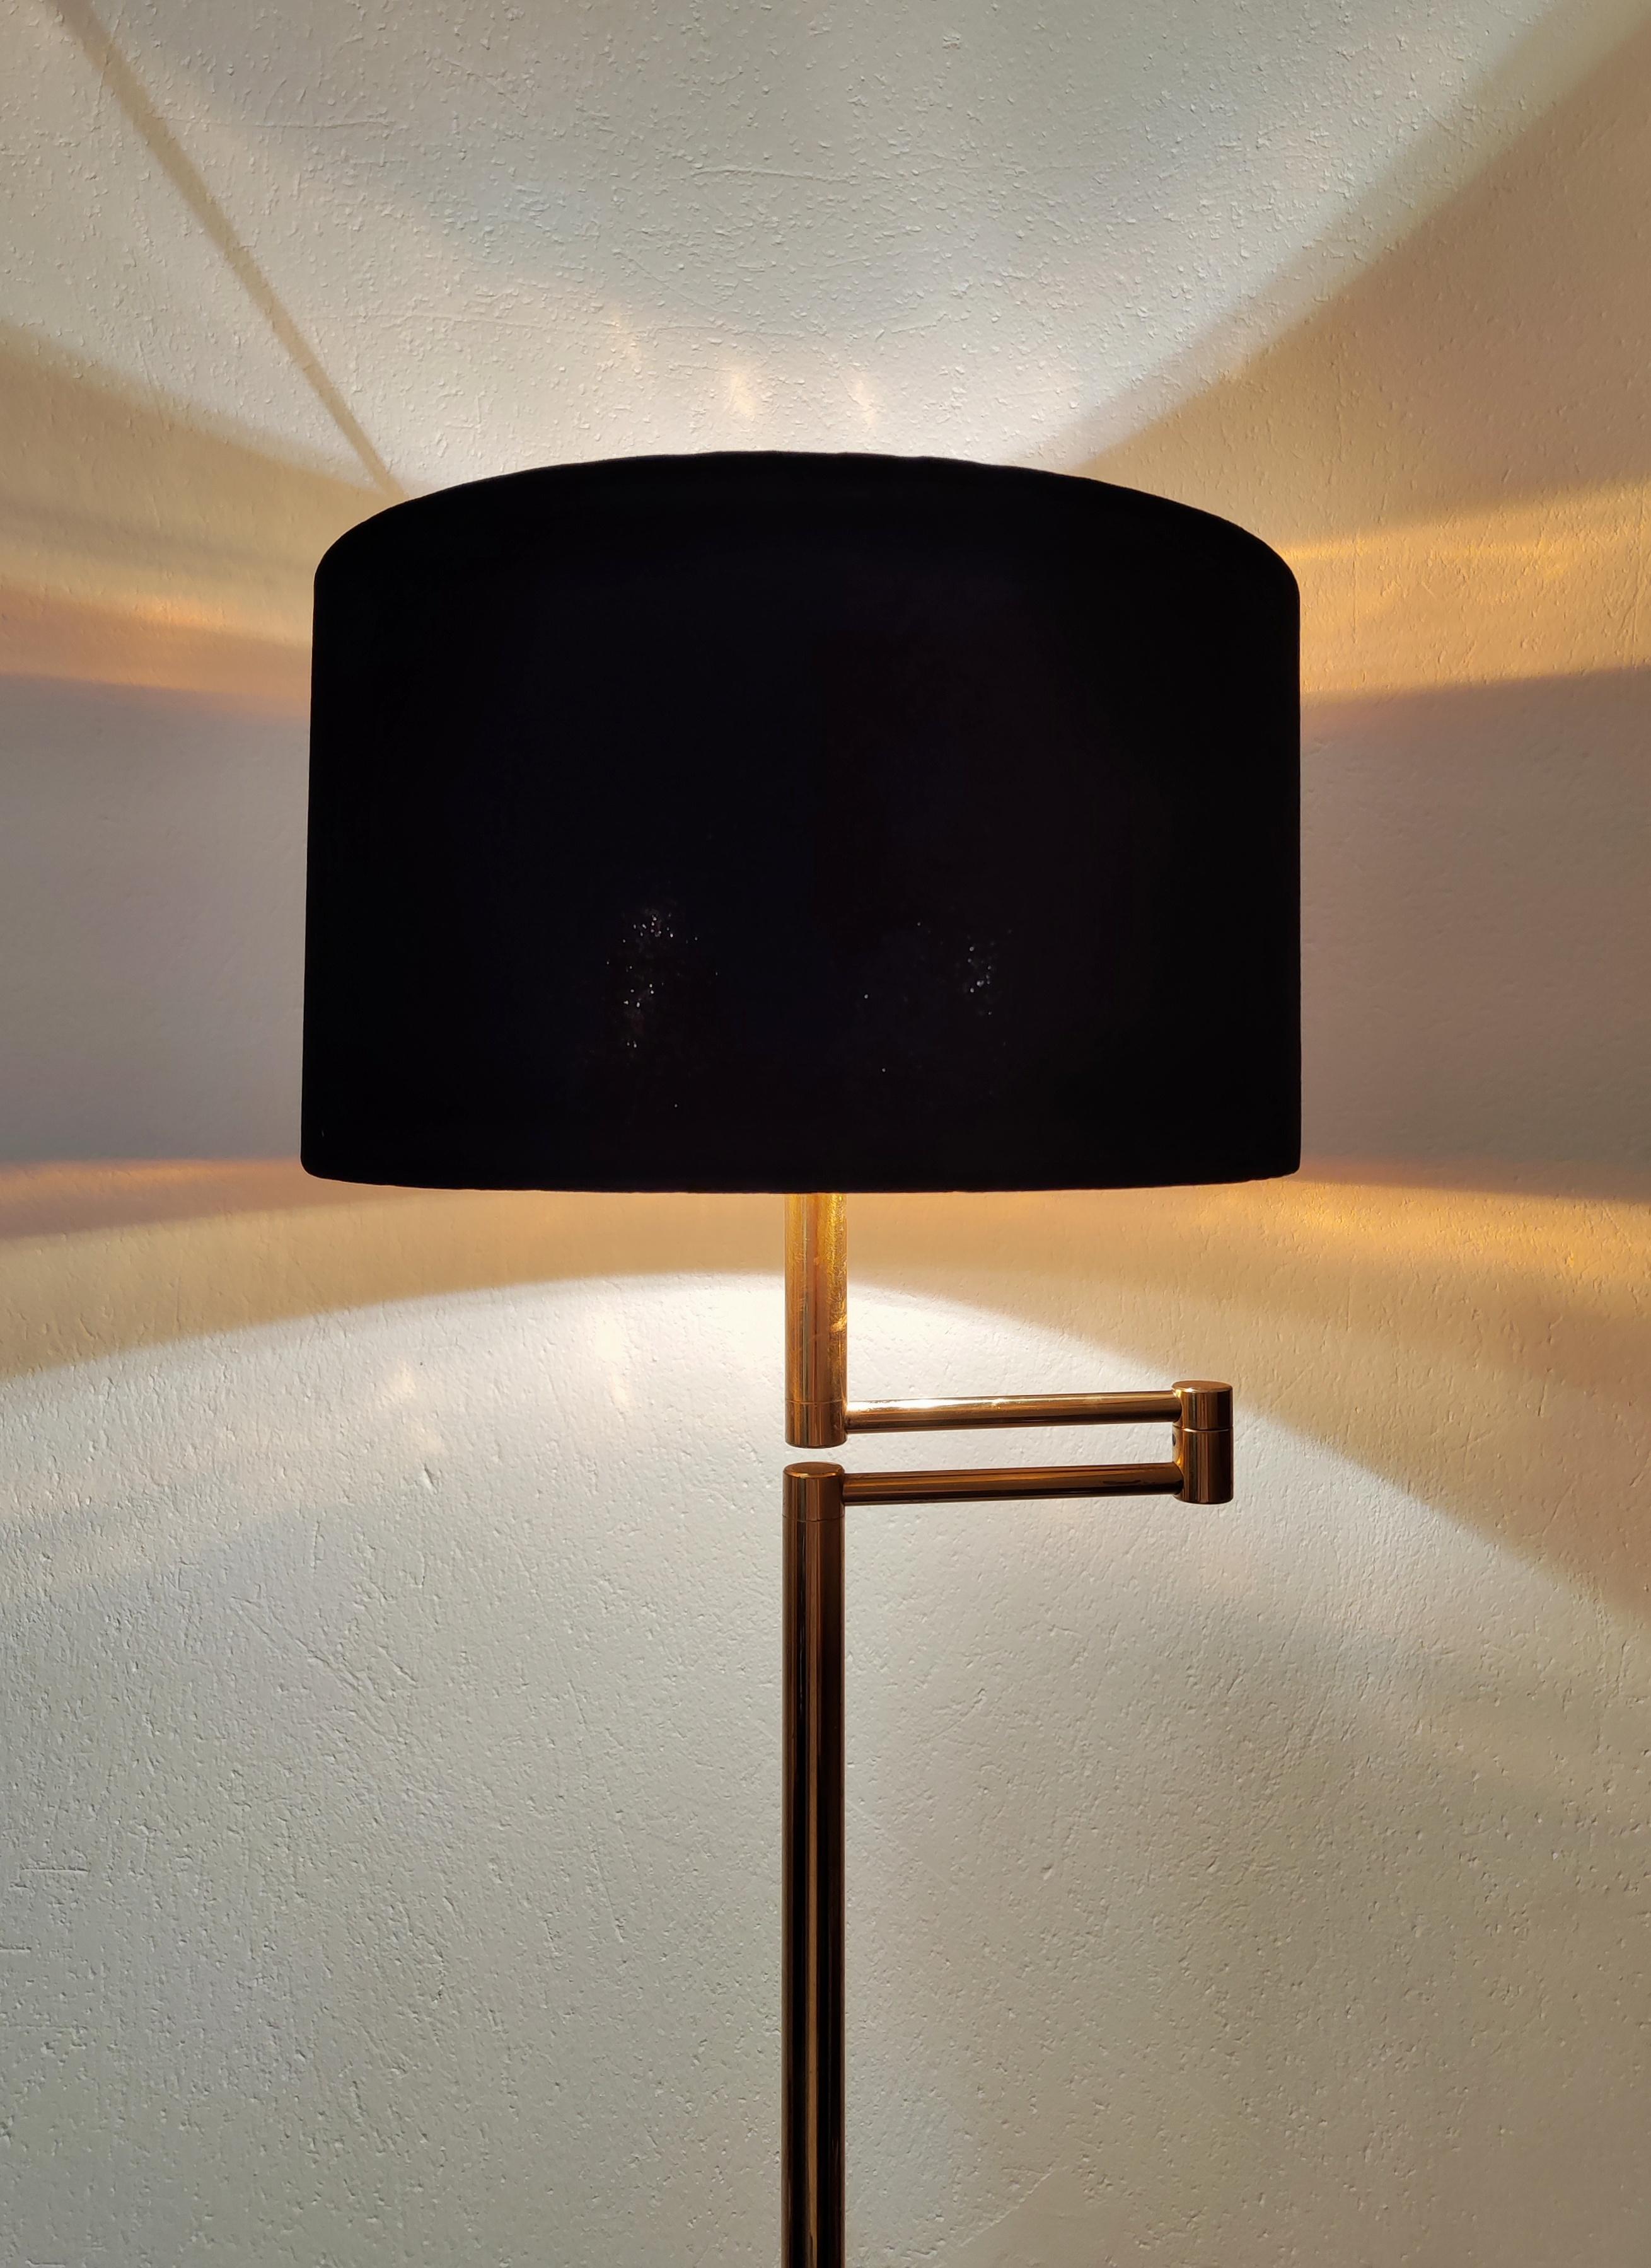 In this listing you will find a Mid Century Modern Swing Arm floor lamp done in brass with black velvet shade. Made in West Germany in 1960s.

The lamp is in a very good vintage condition with some patina on brass. The velvet shade is new.

When